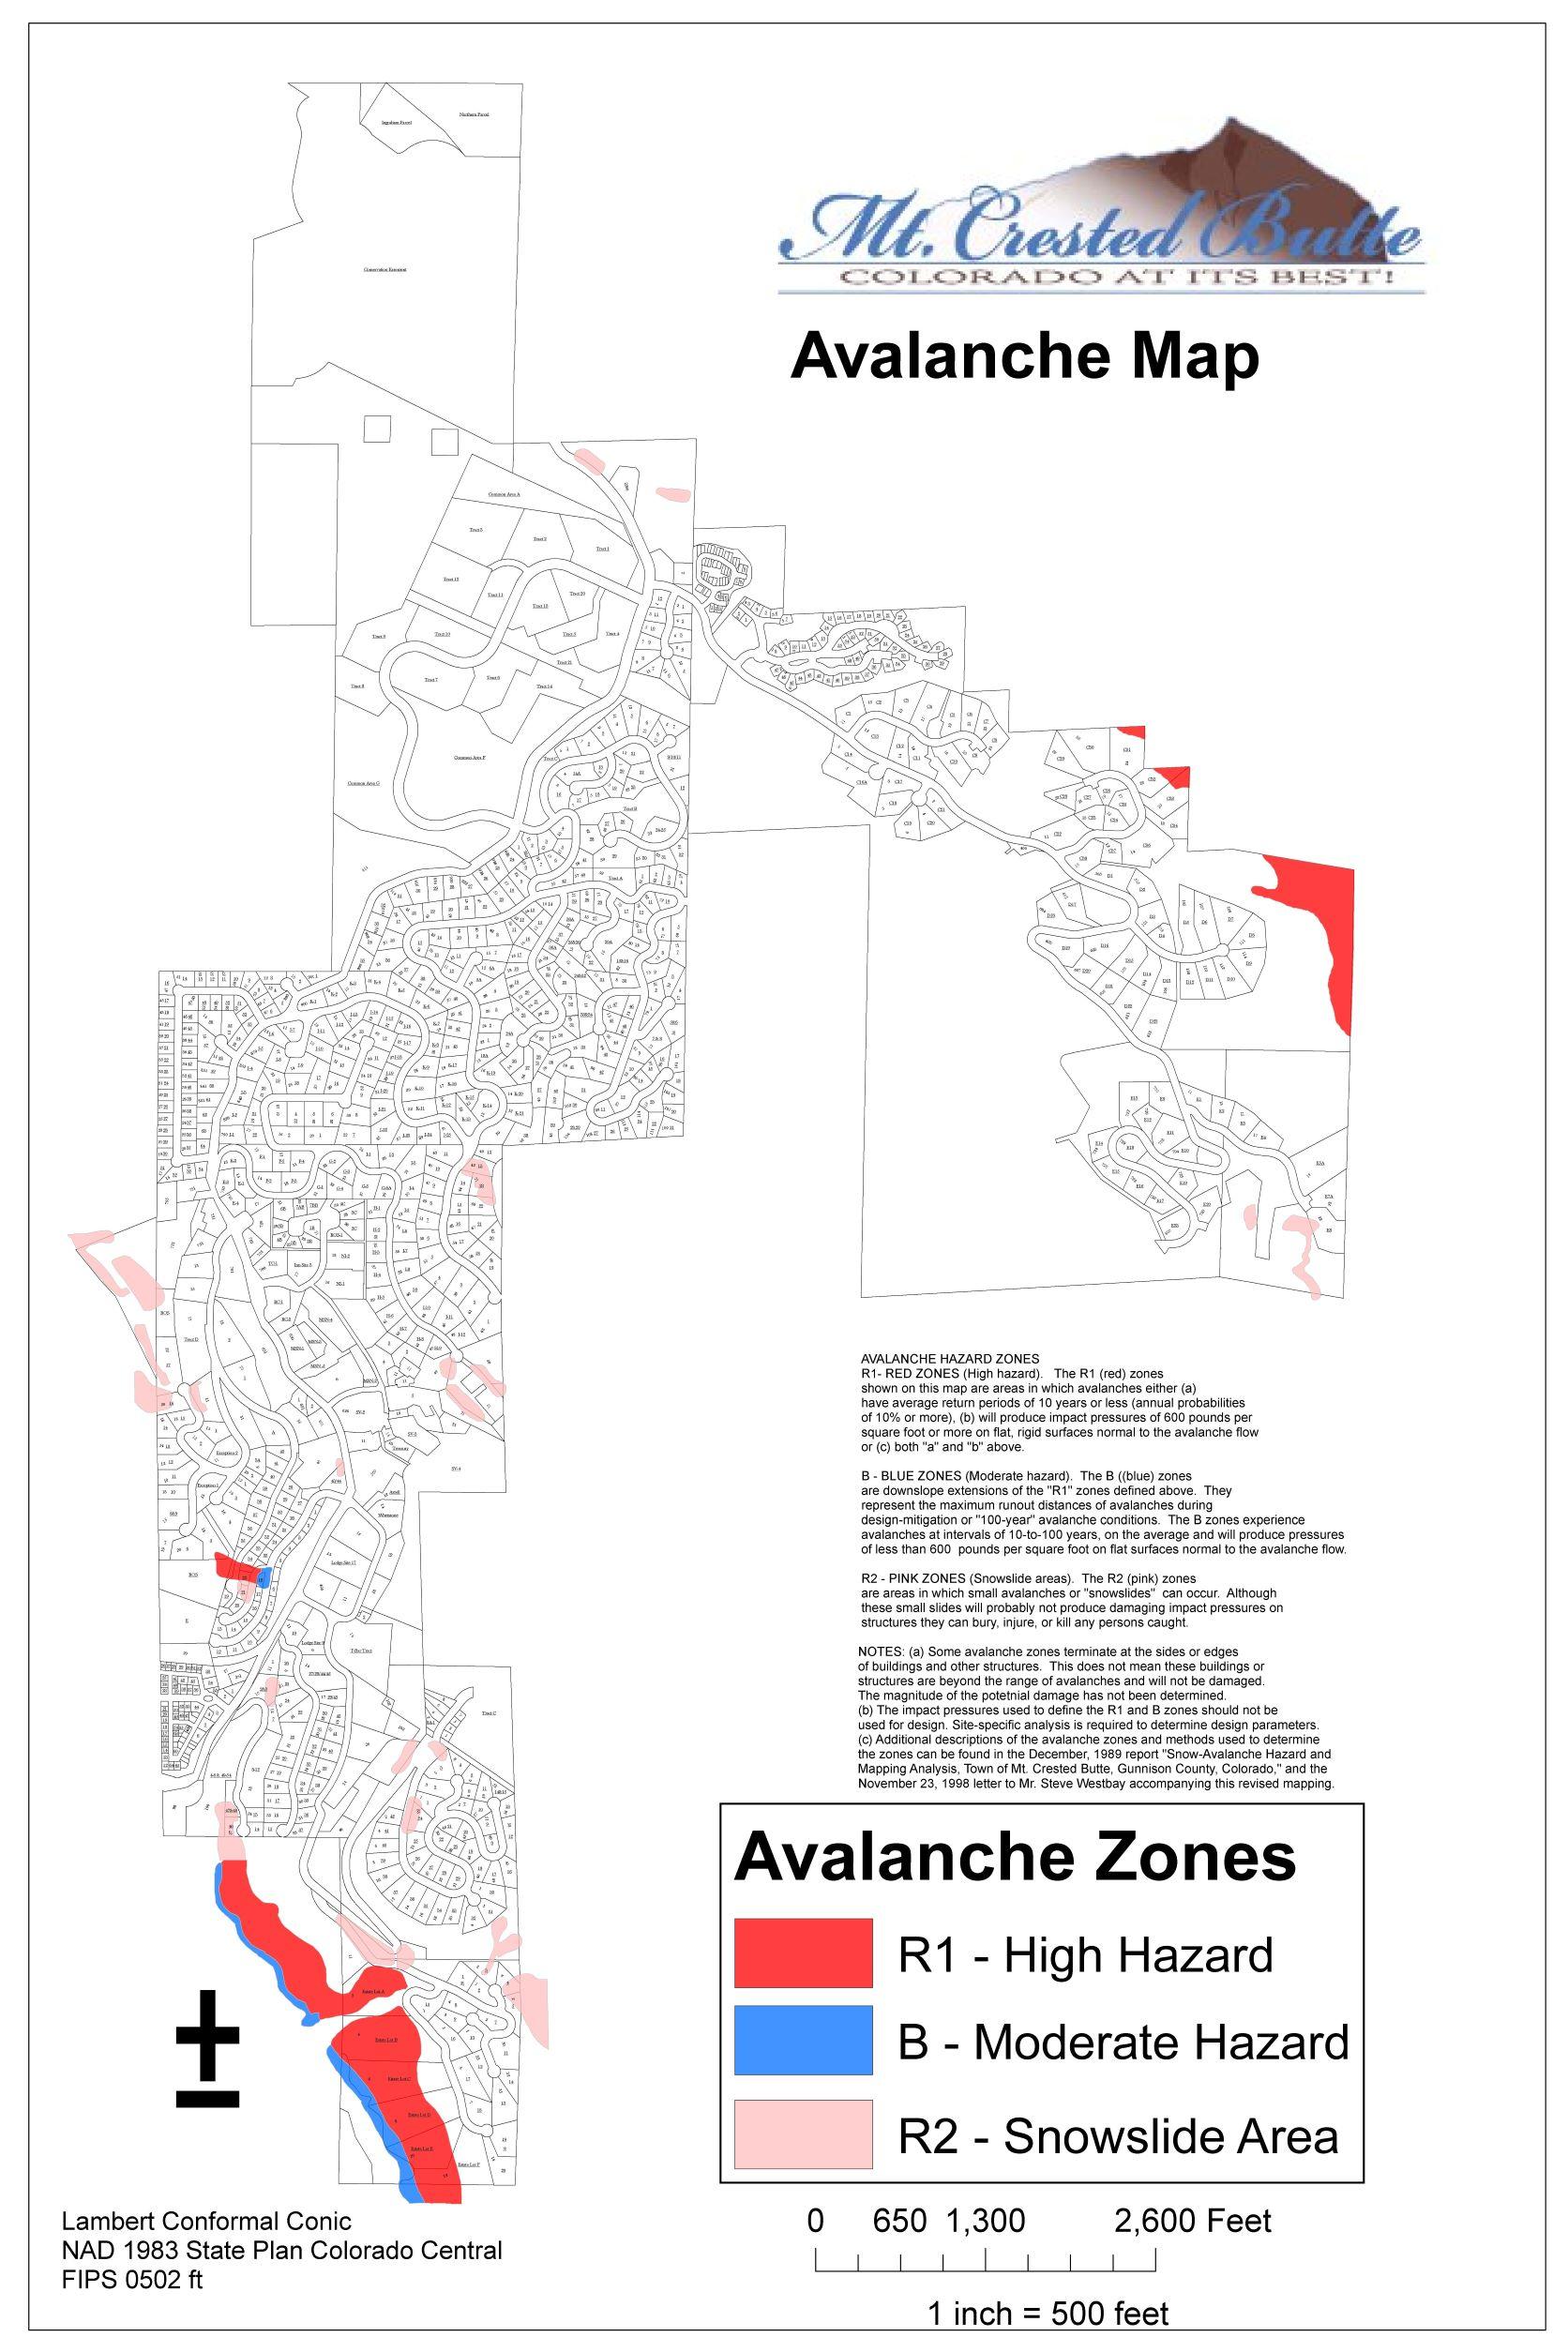 Map of Avalanche Zones in the town of Mt. CB